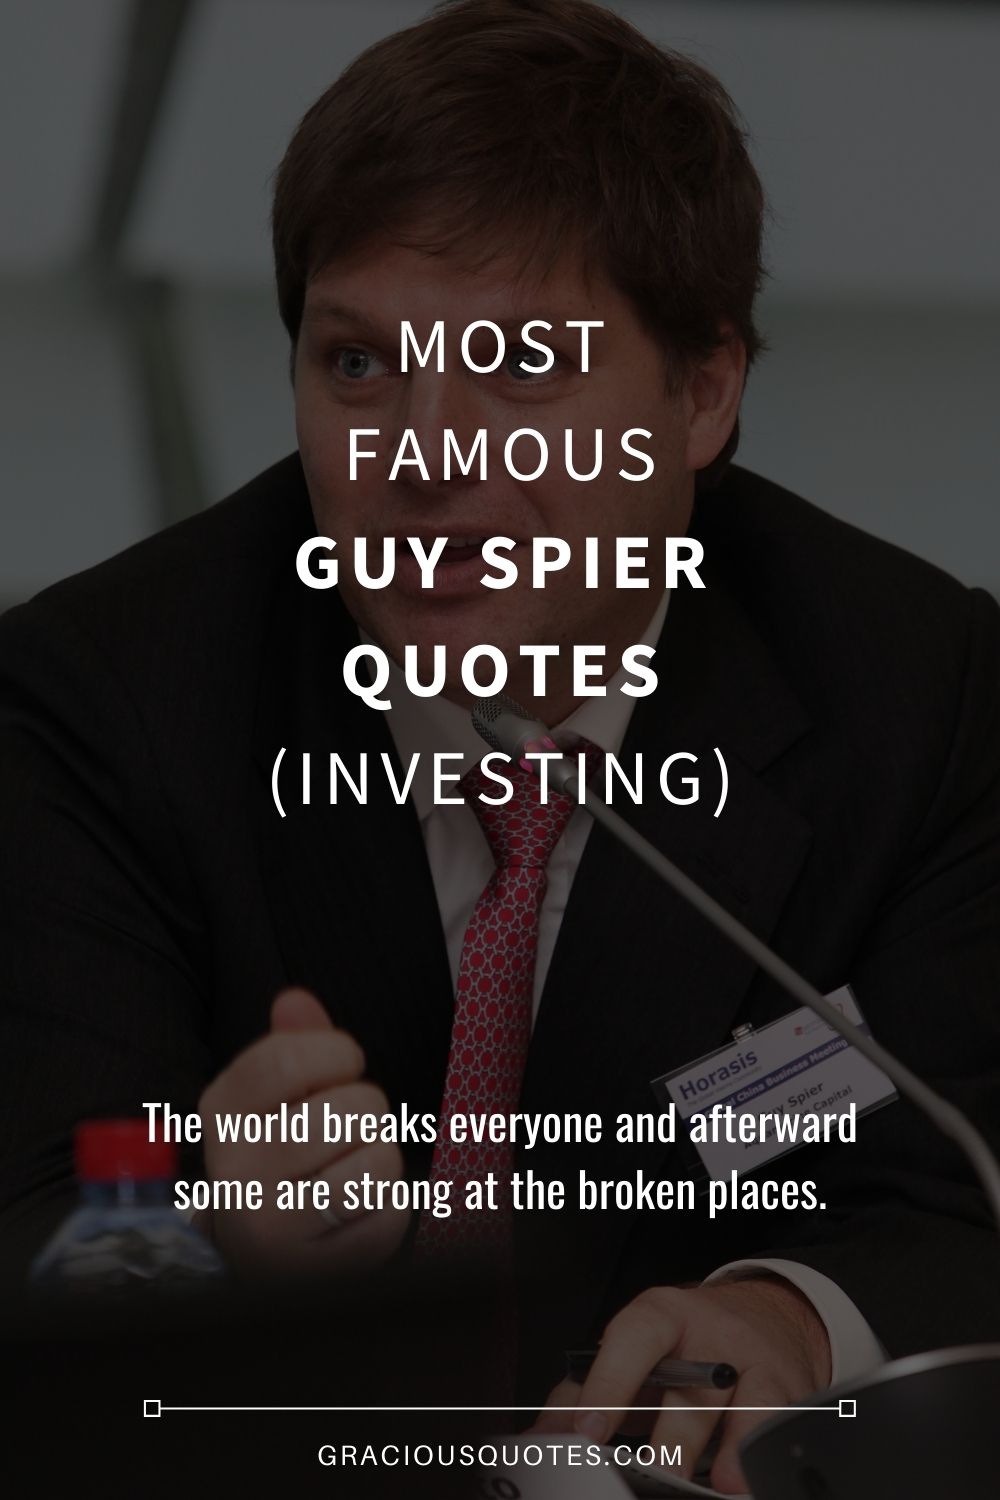 Most Famous Guy Spier Quotes (INVESTING) - Gracious Quotes